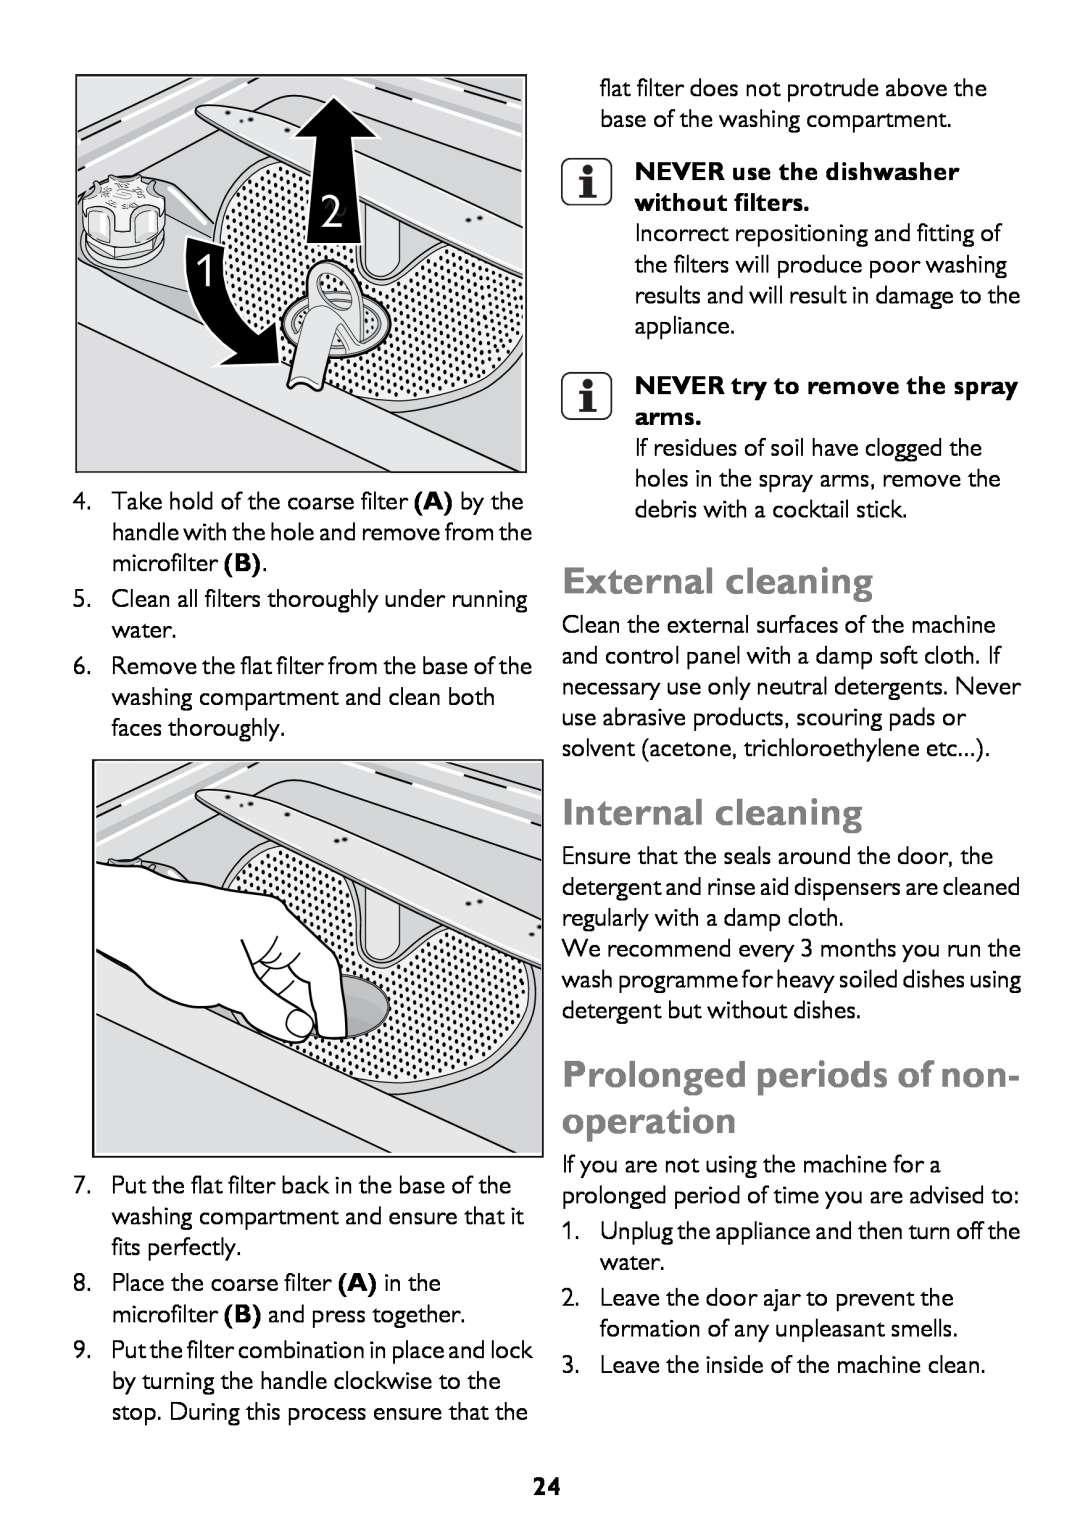 John Lewis JLDWW 906 instruction manual External cleaning, Internal cleaning, Prolonged periods of non- operation 